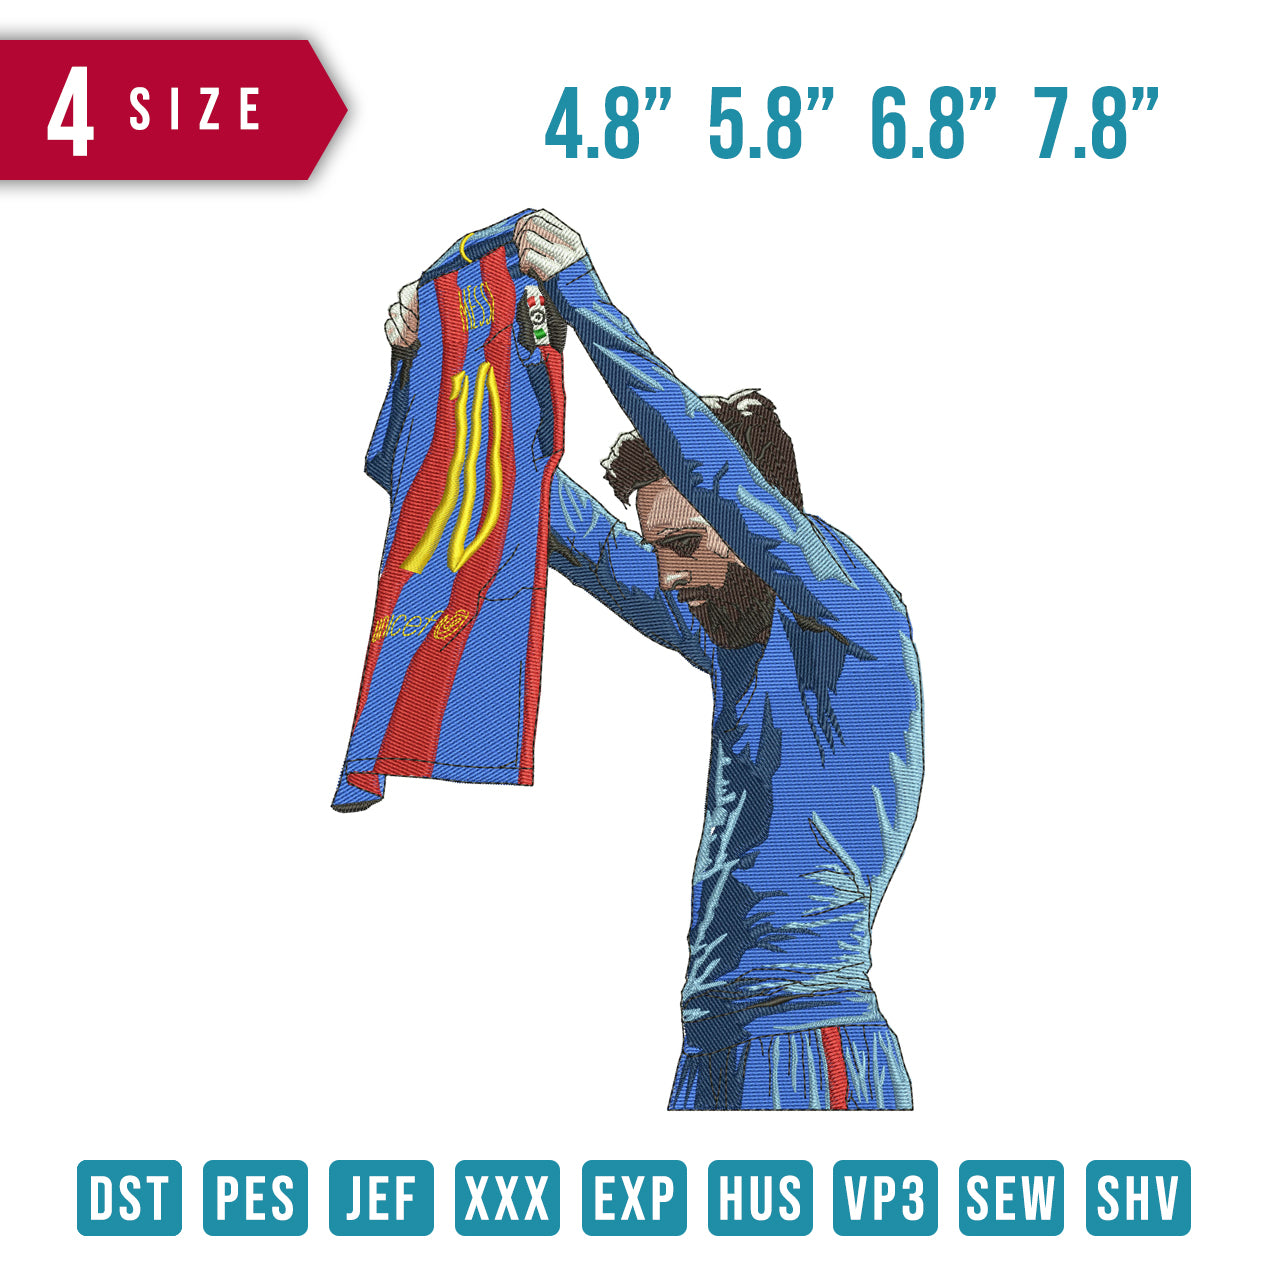 messi lifted shirt